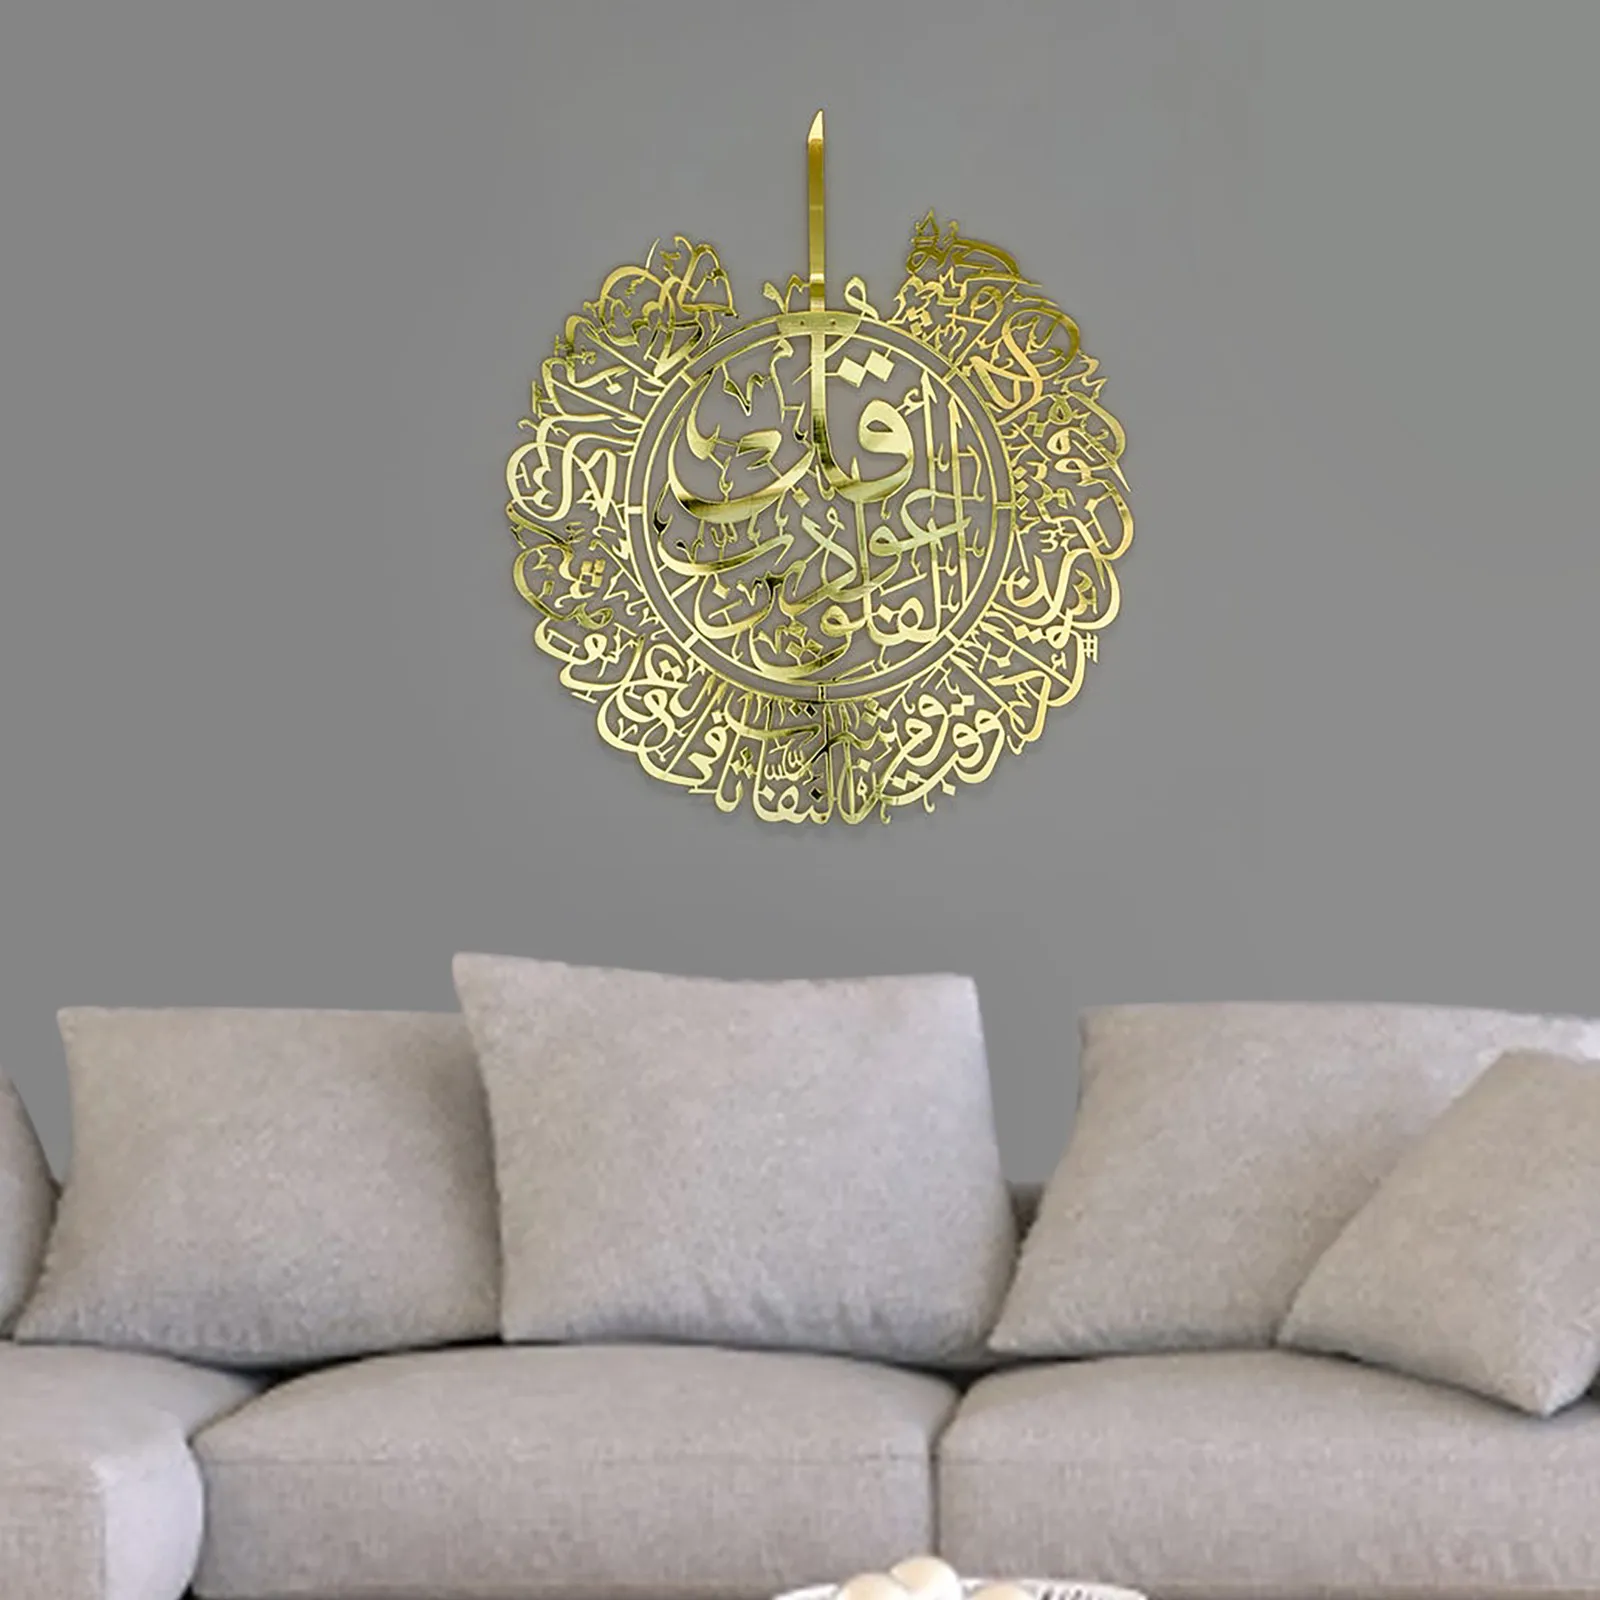 Details about   Muslims Ramadan Islamic Wall Art Decor Acrylic Home Calligraphy Decoration Gifts